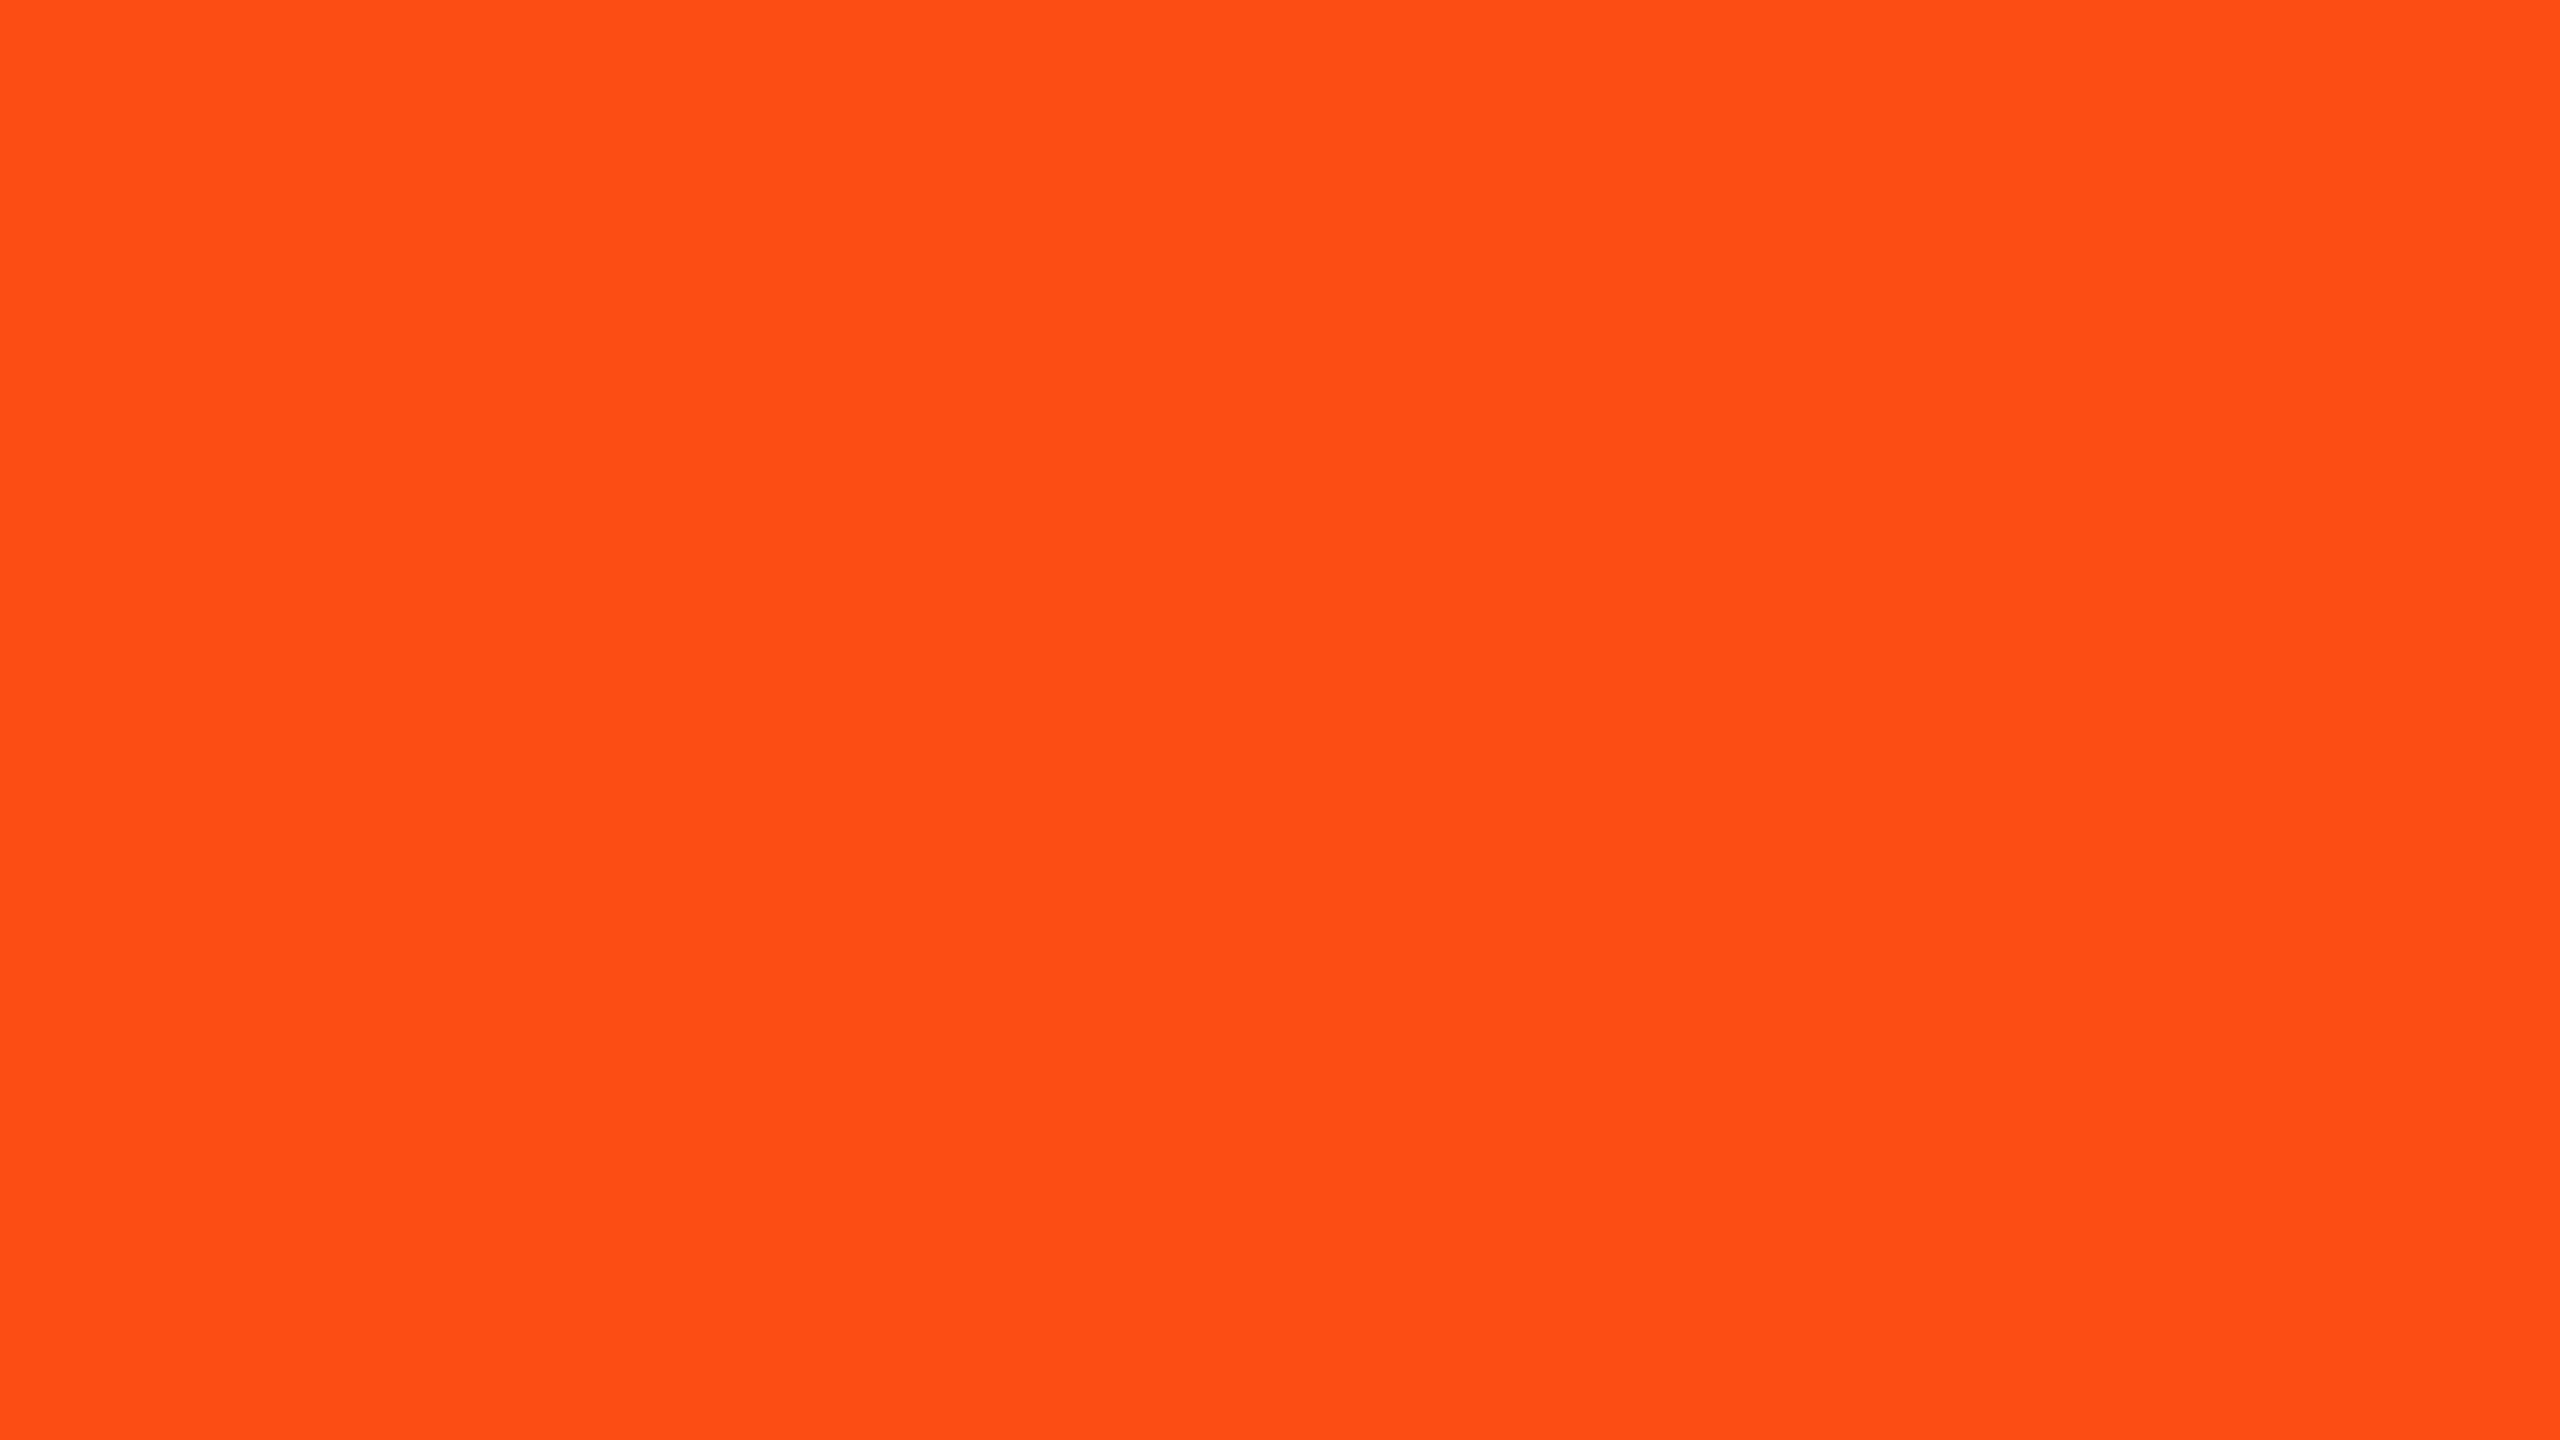 Orange Solid Color Wallpapers 49781 2560x1440 px ~ HDWallSource